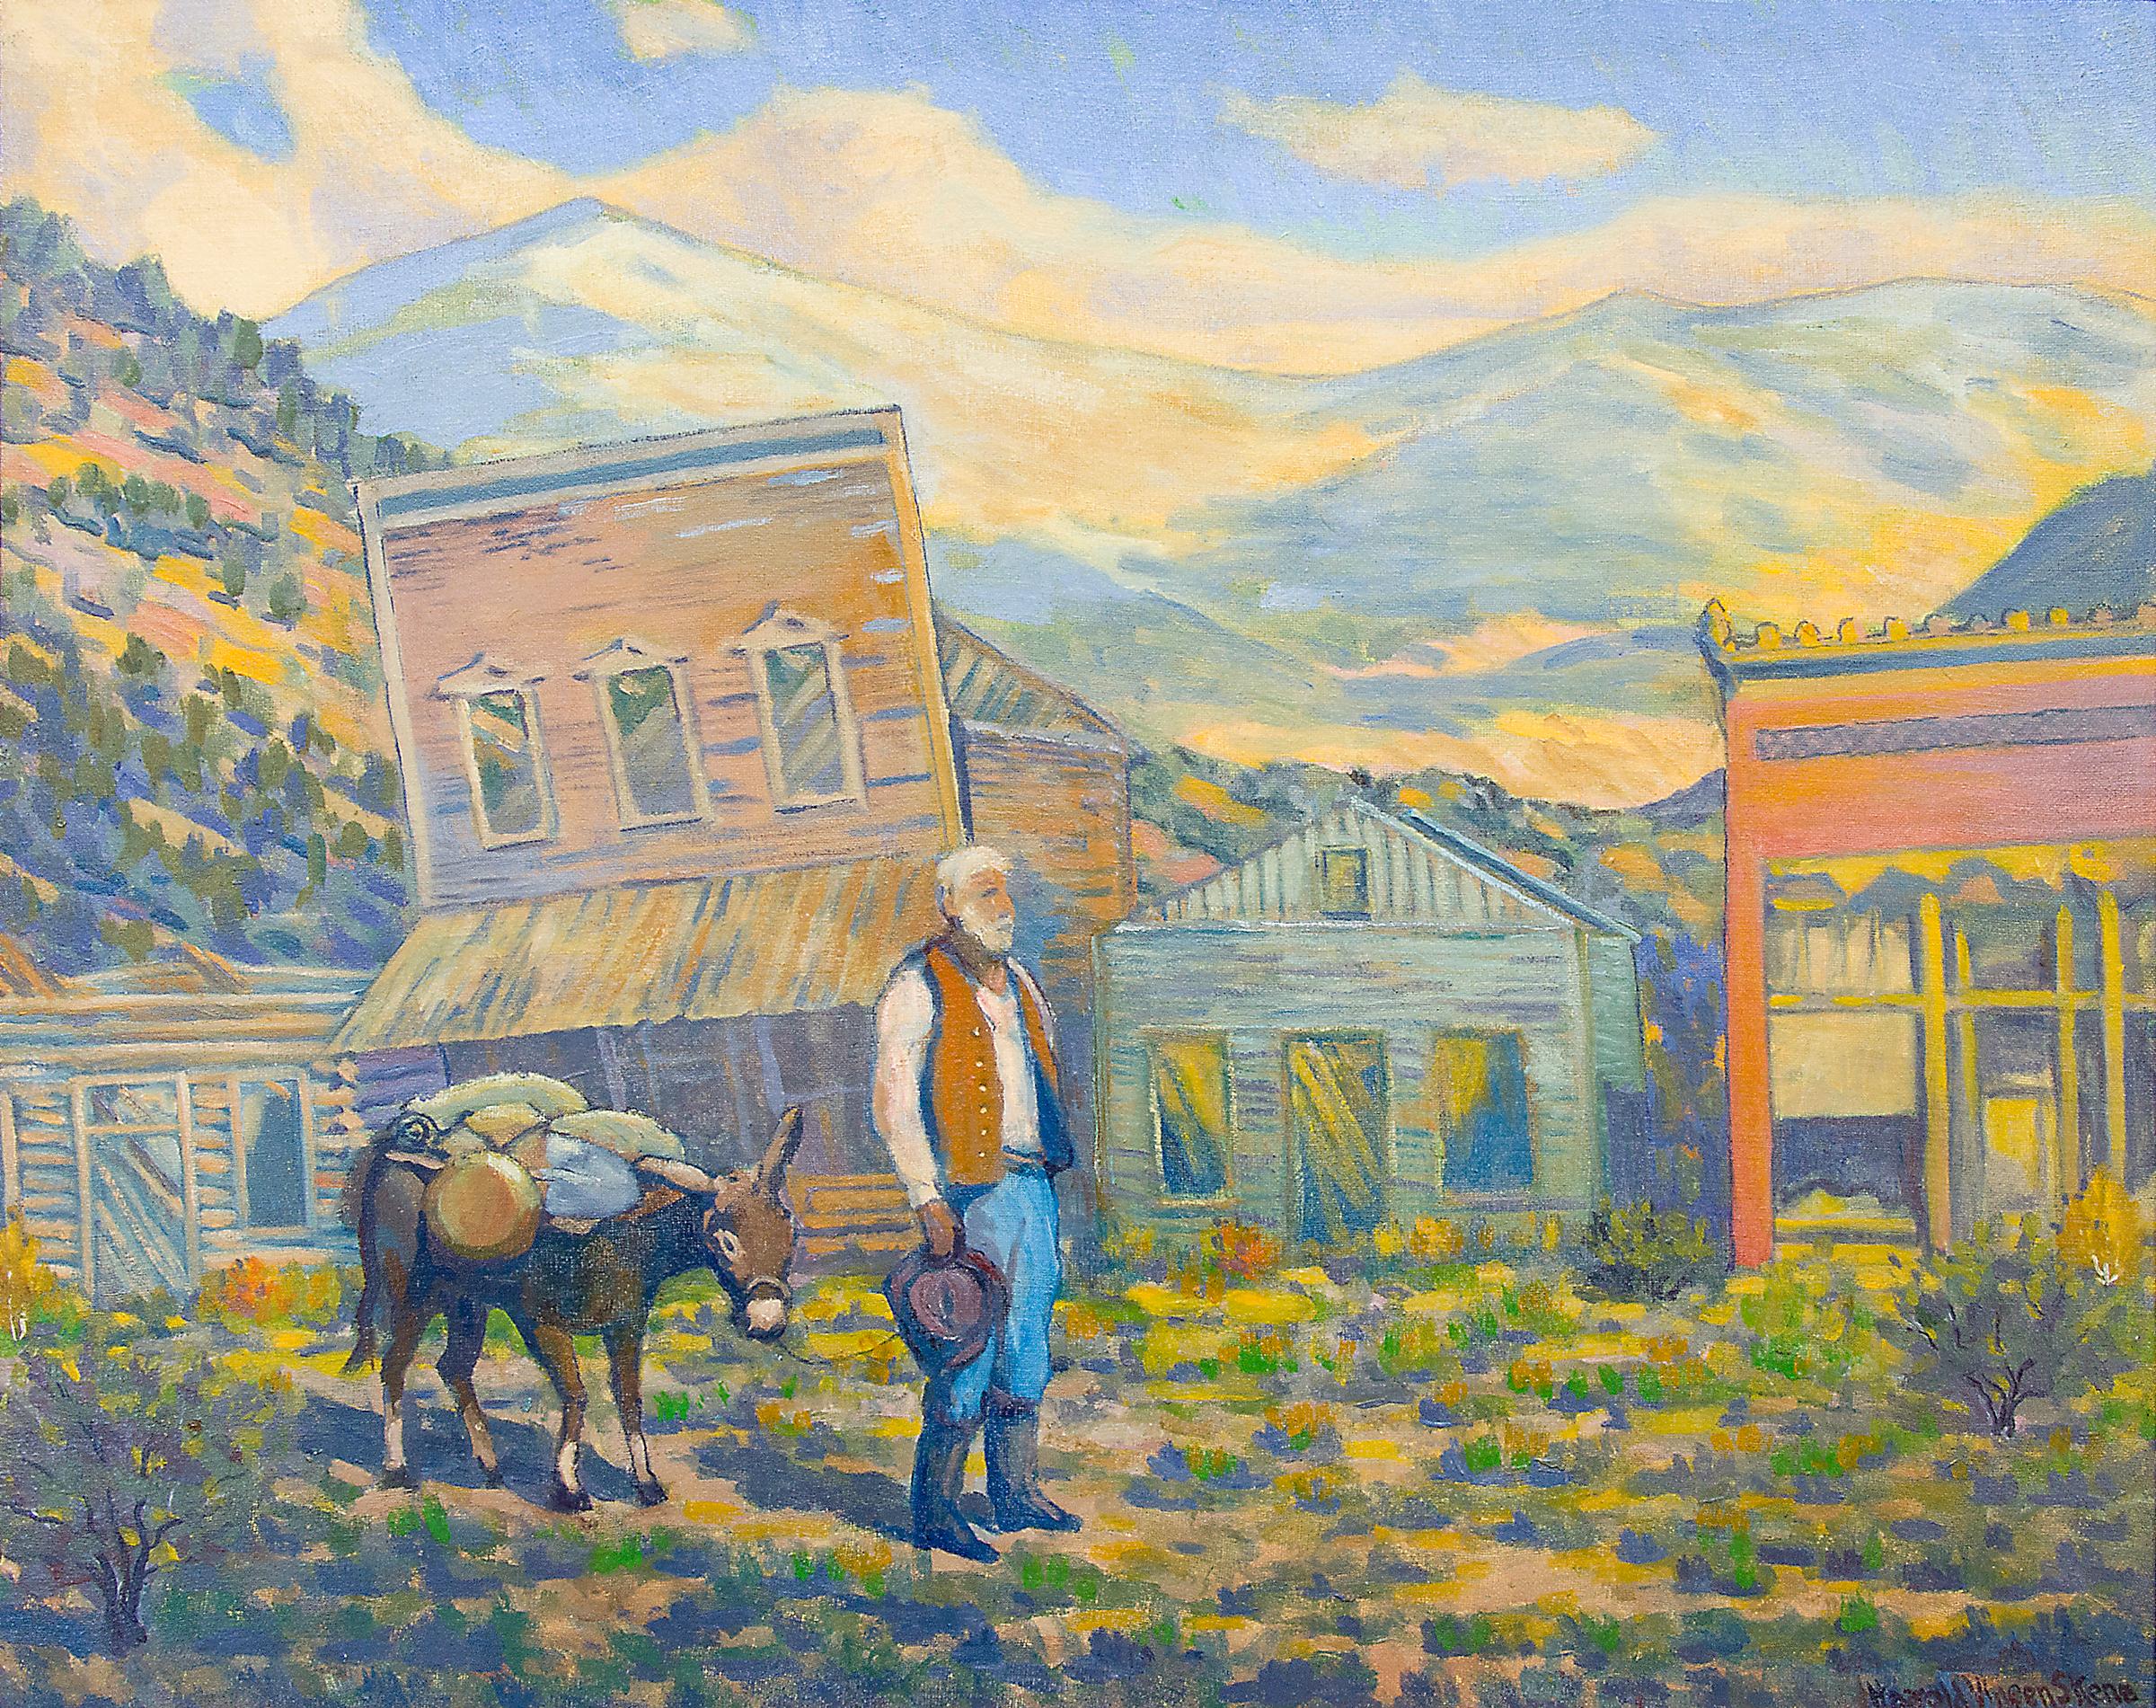 Ghost Town, Prospector & Mule, Abandoned Buildings, Mining Town with Mountains - Painting by Harold Vincent Skene